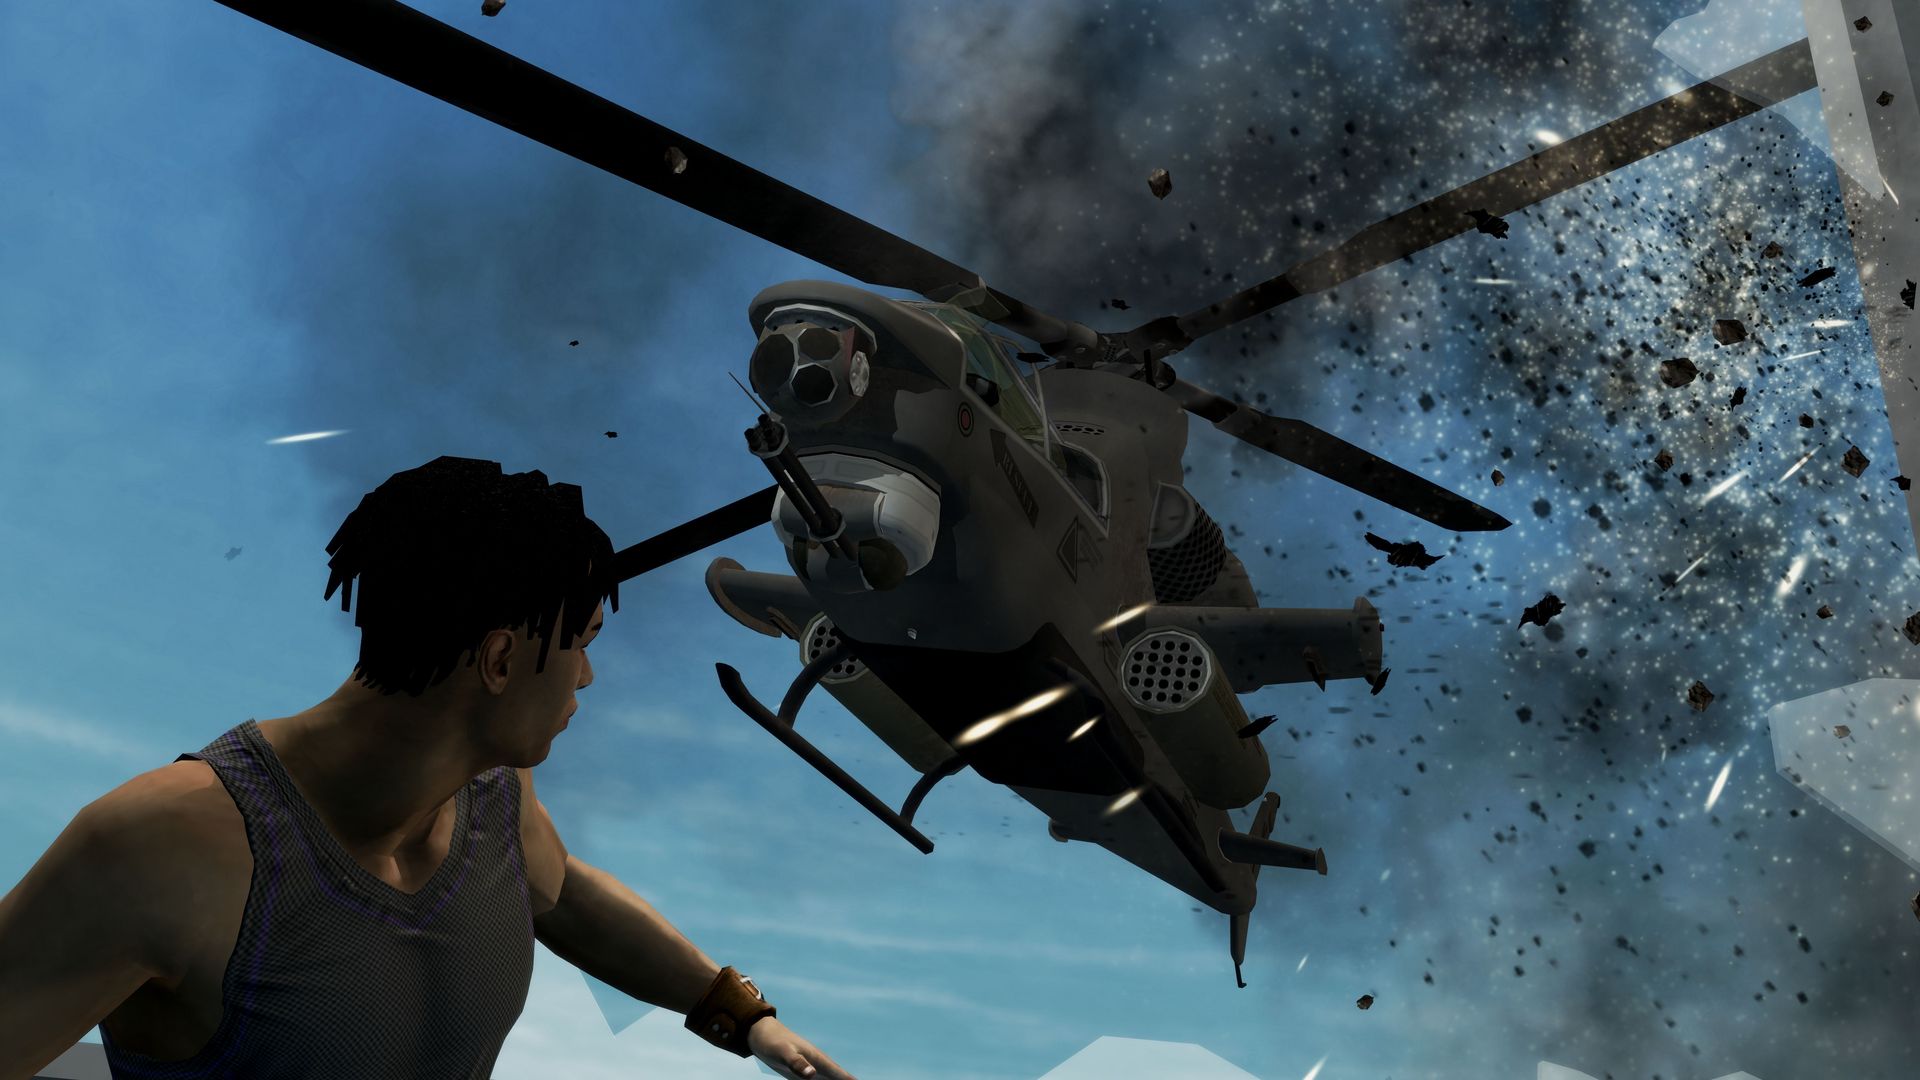 The Saints Row 2 helicopter crashes